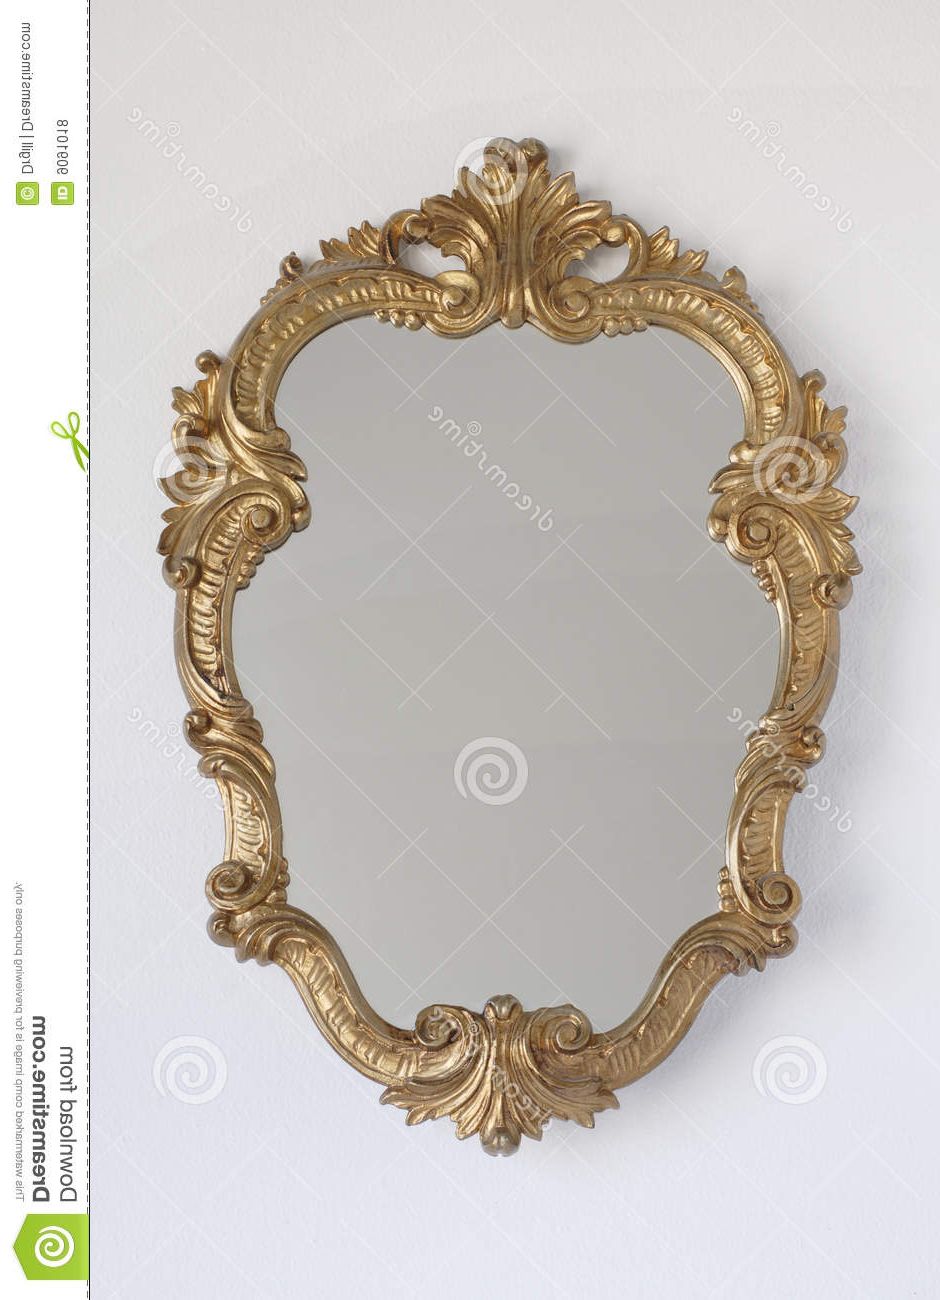 Princess Wall Mirrors Inside Well Known Princess Mirror On A Wall Stock Photo (View 6 of 20)